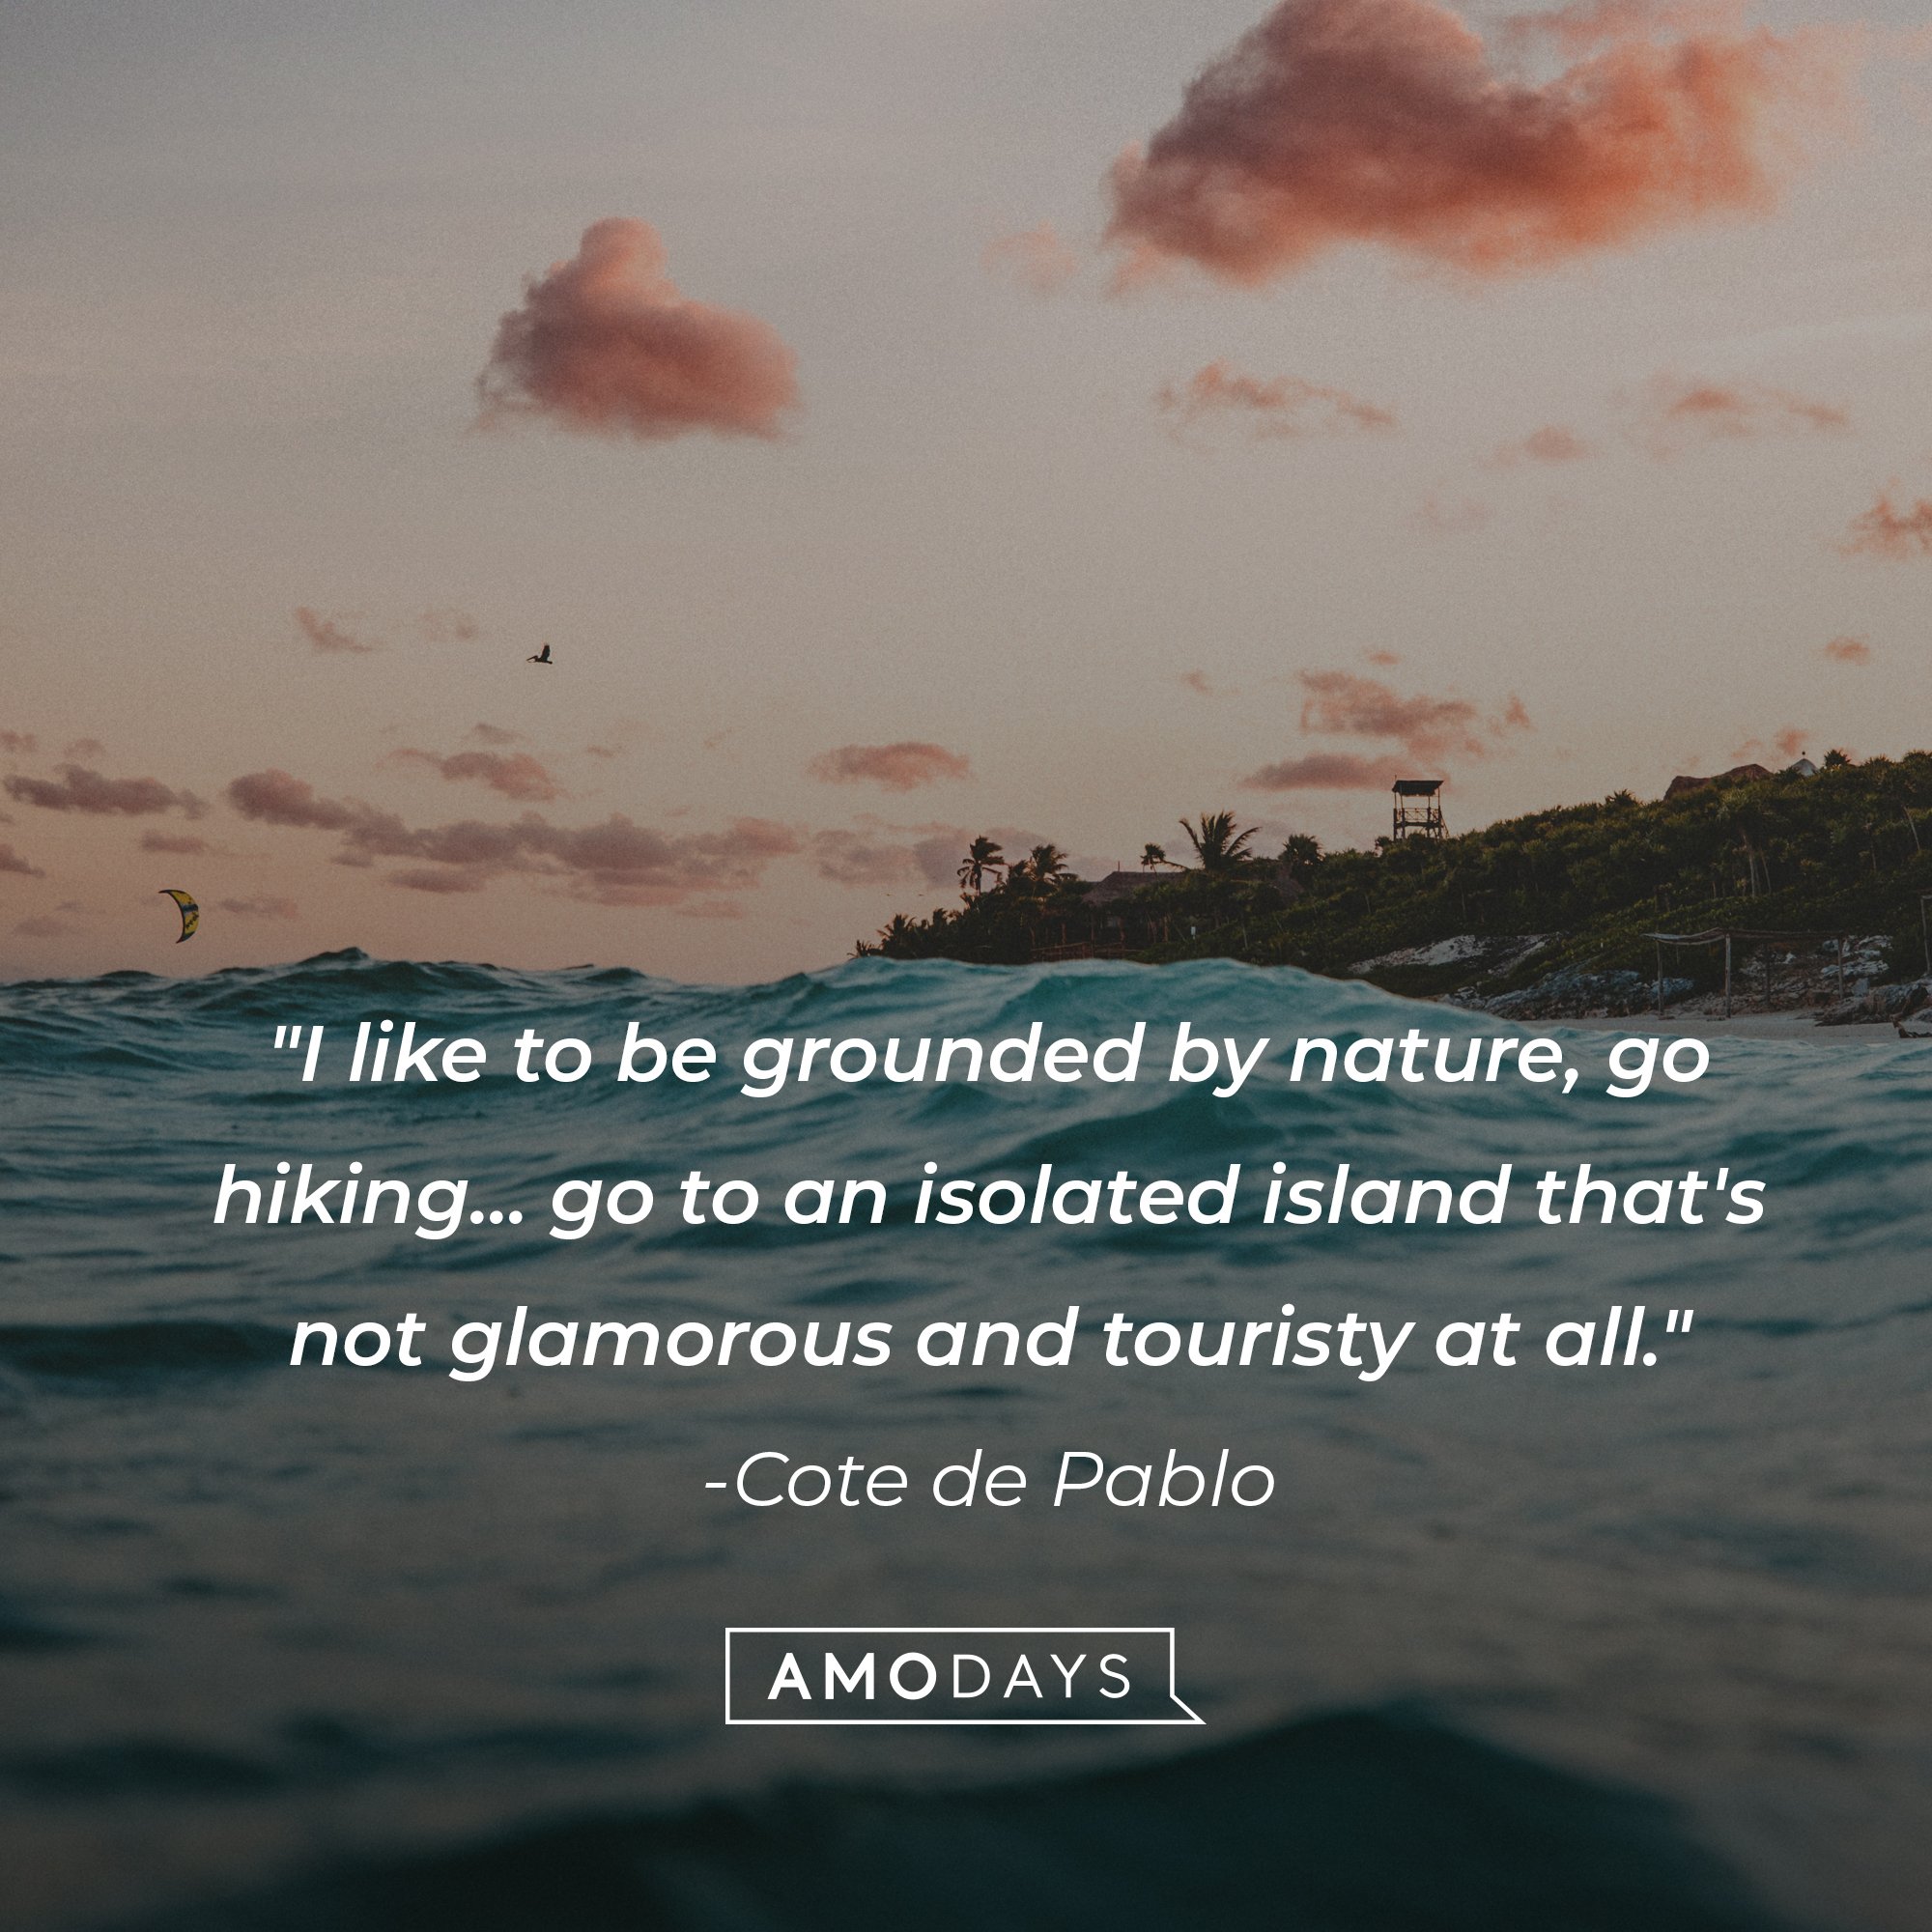 Cote de Pablo's quote: "I like to be grounded by nature, go hiking... go to an isolated island that's not glamorous and touristy at all." | Image: AmoDays